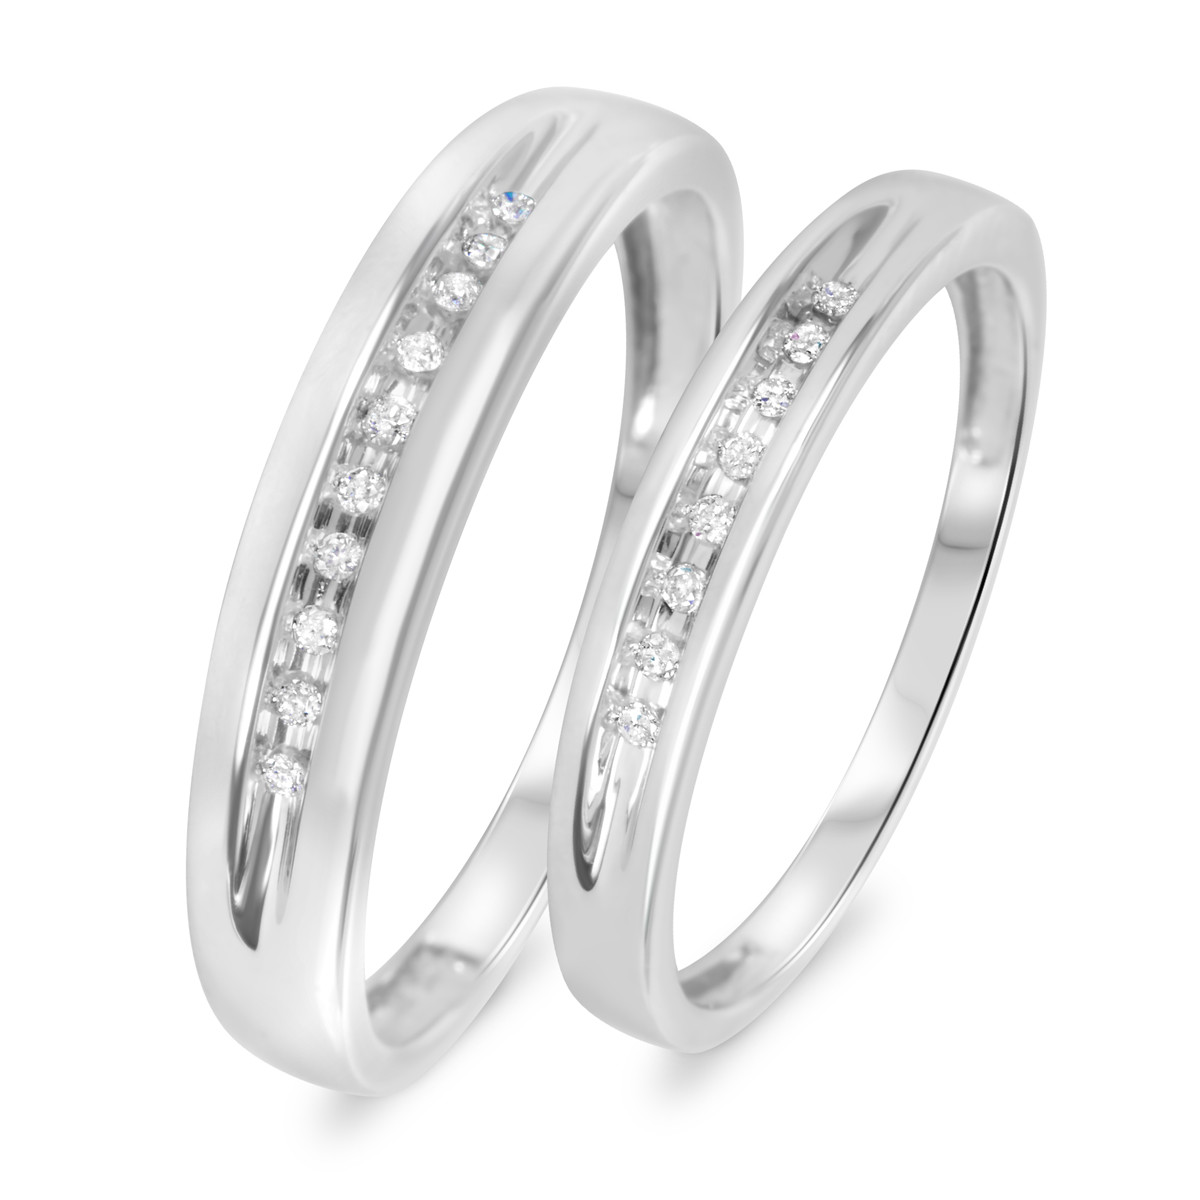 His And Hers Wedding Bands White Gold
 1 10 Carat T W Diamond His And Hers Wedding Rings 14K